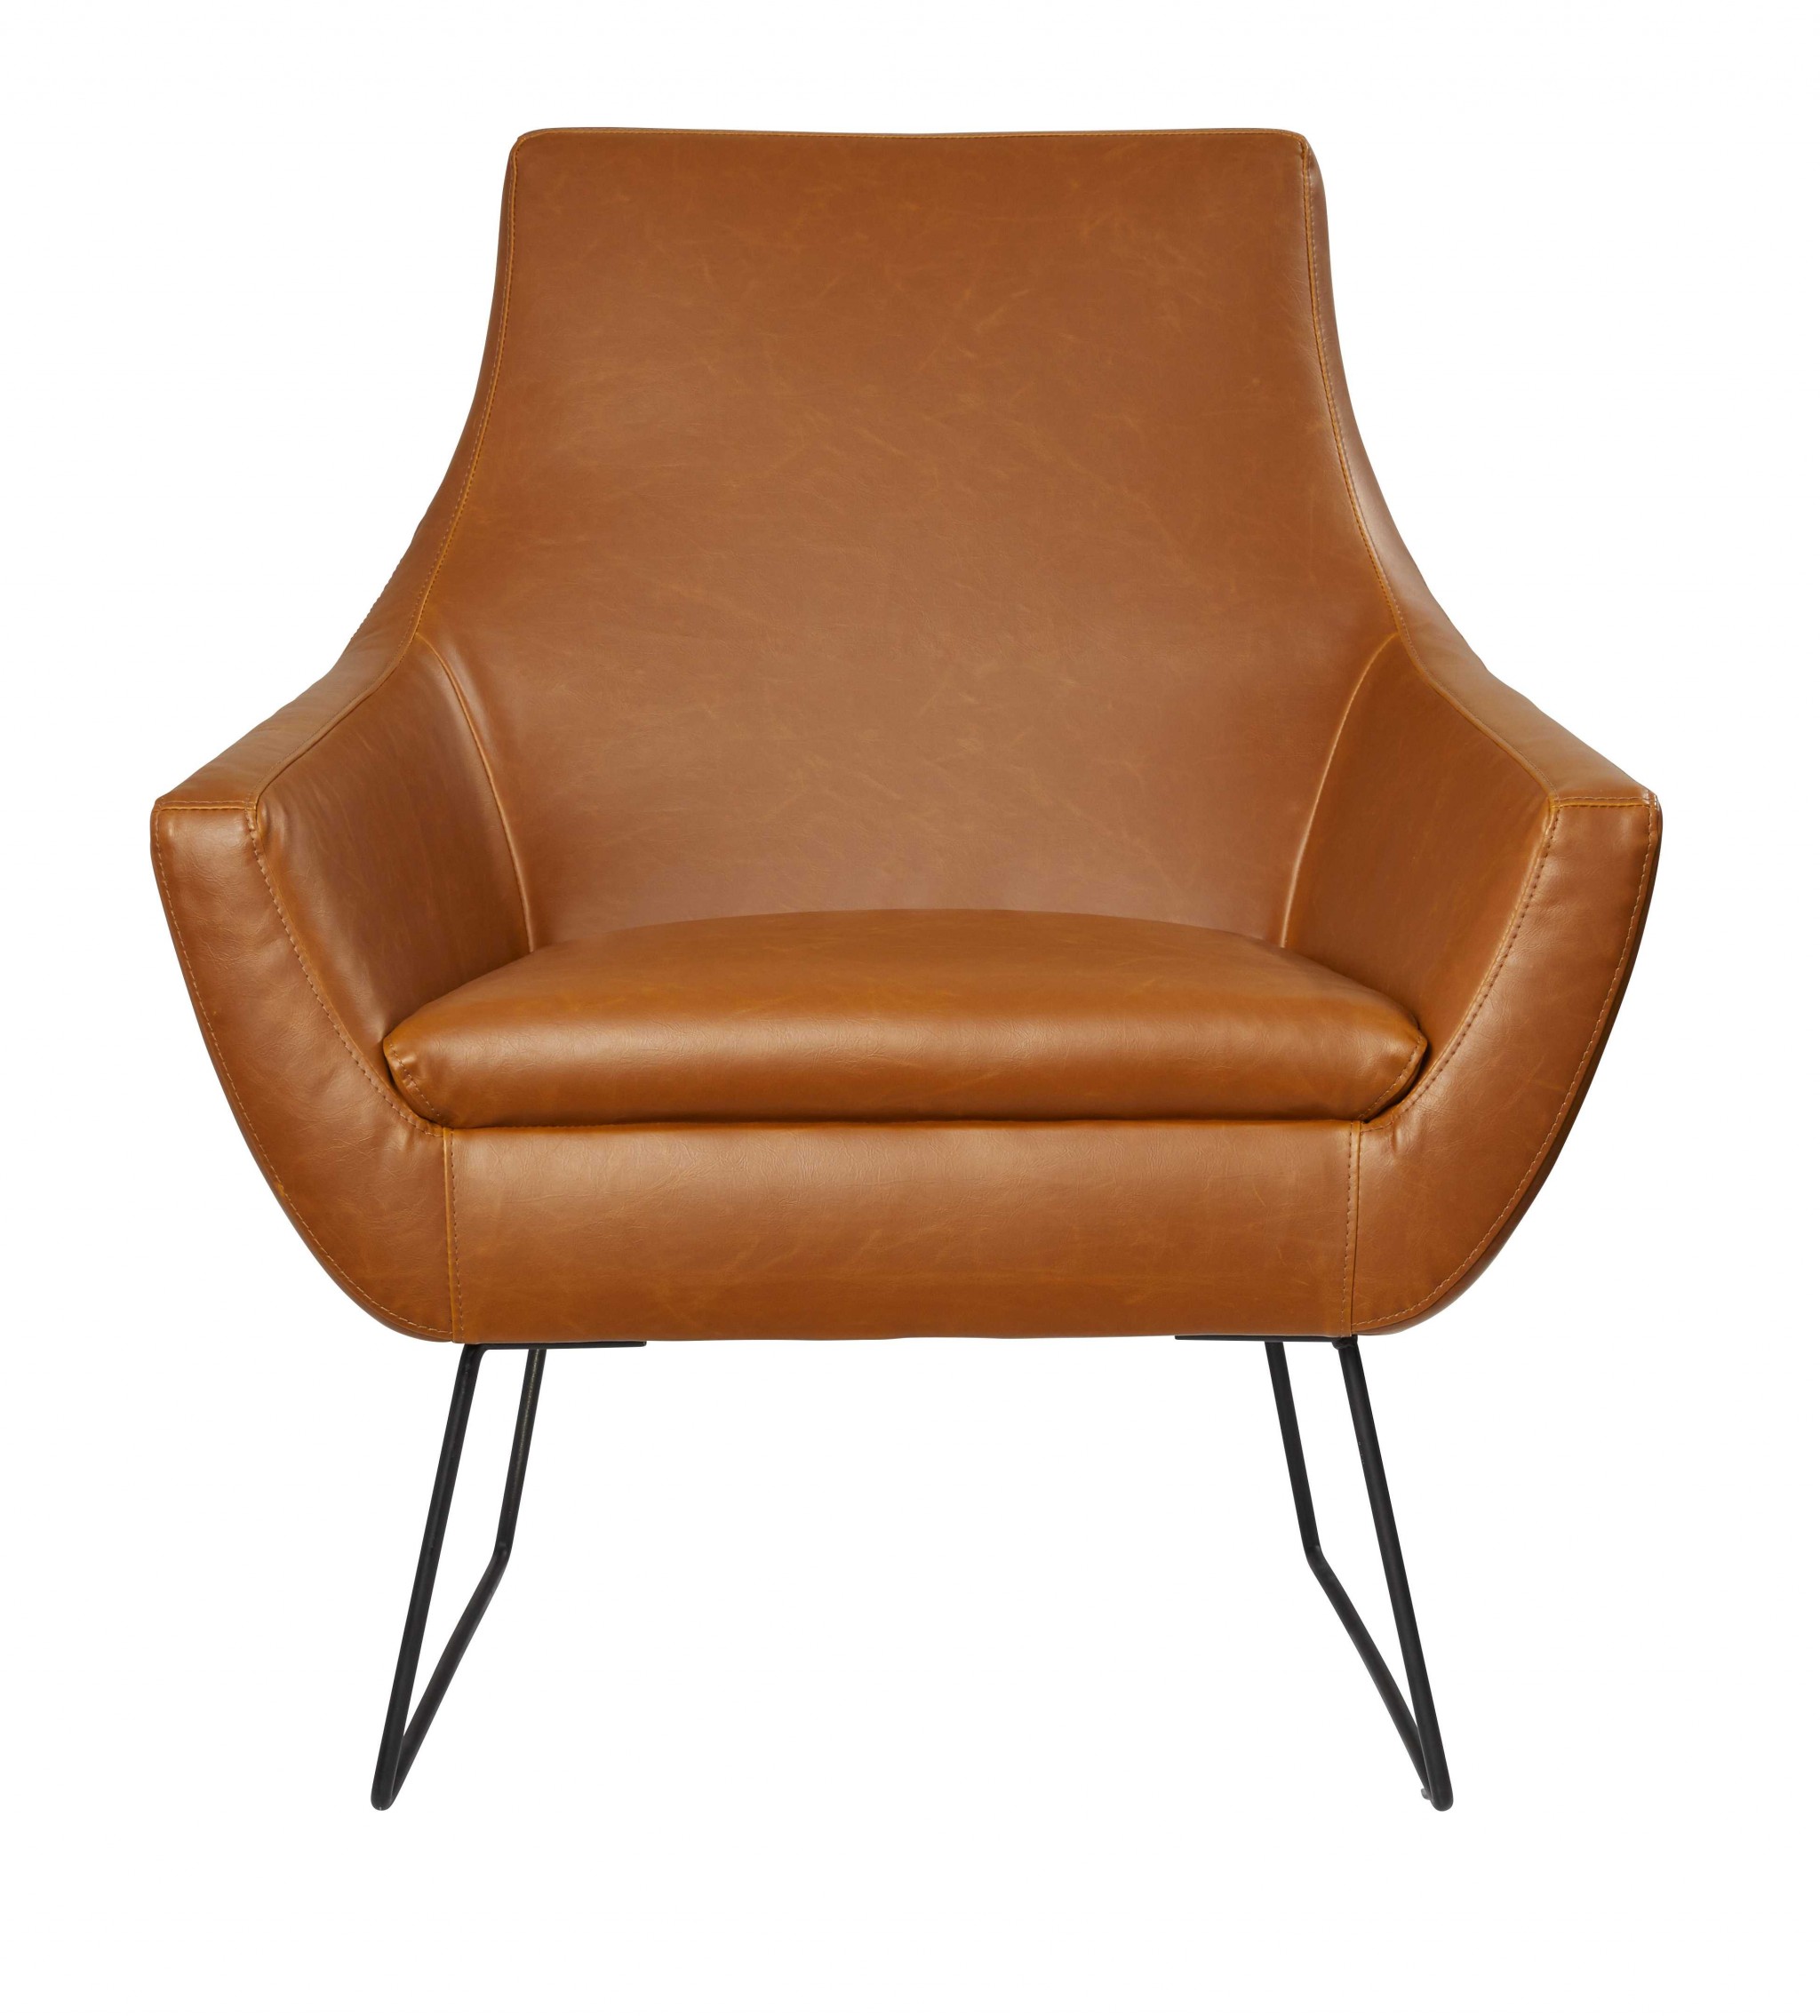 Retro Mod Distressed Camel Faux Leather Arm Chair-372983-1